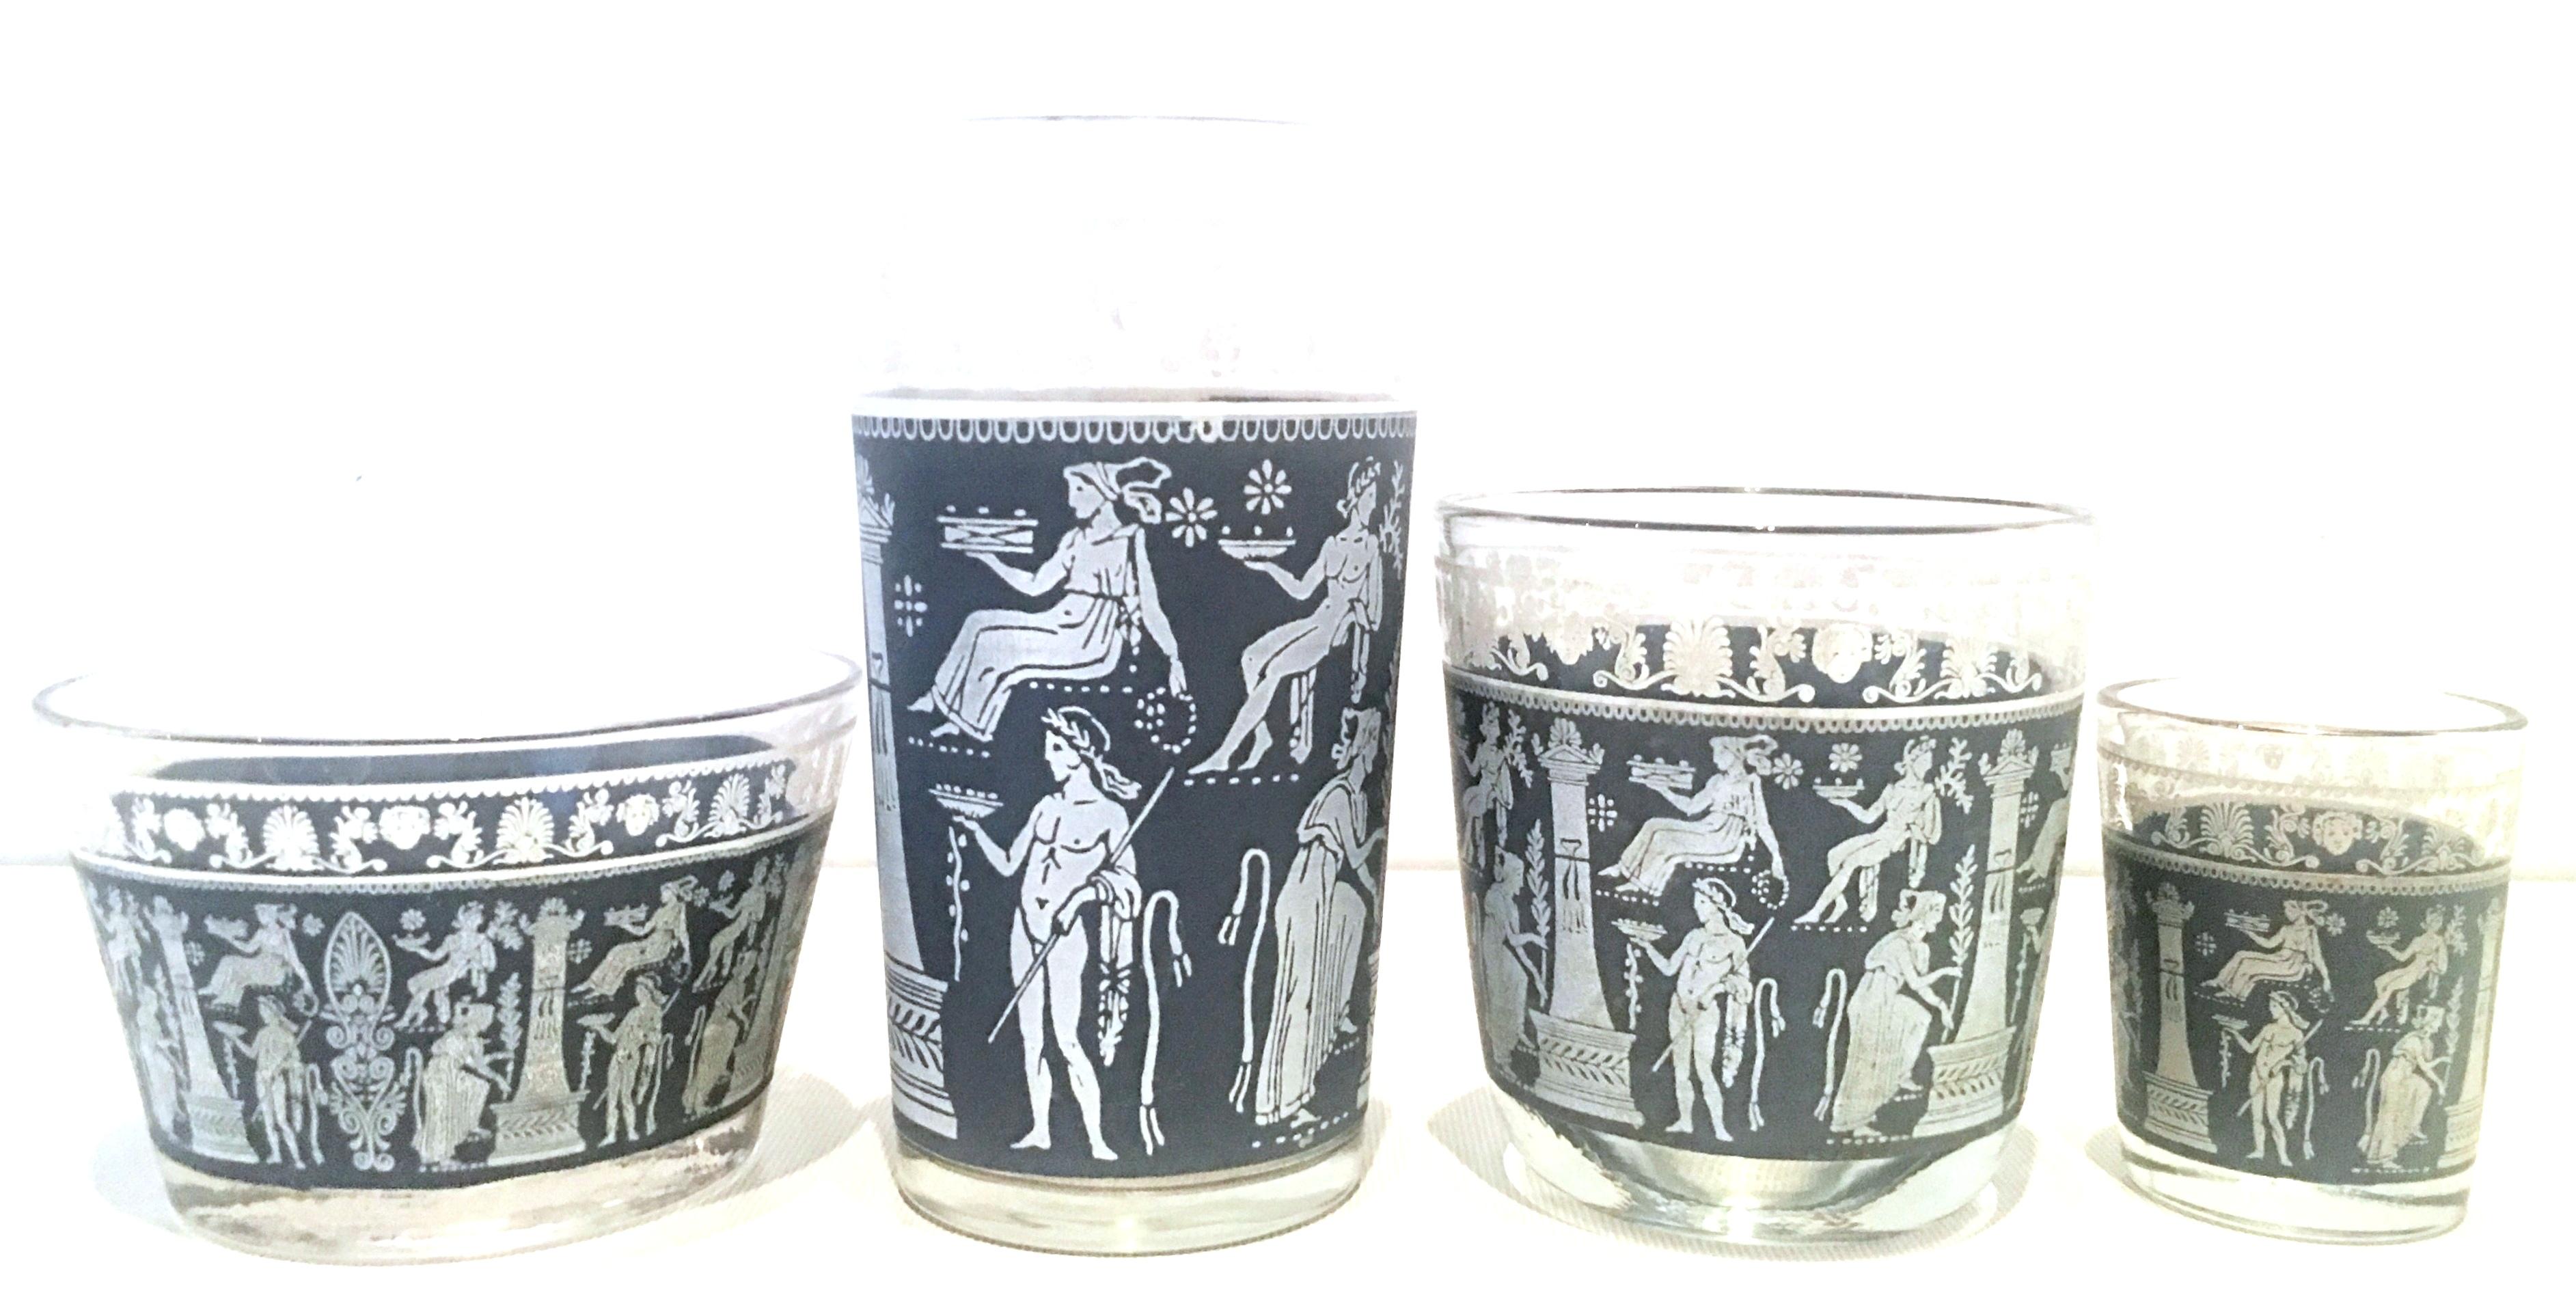 Mid-20th century printed glass Wedgwood blue Hellenic drinks set of 28 pieces. This Hellenic motif in 